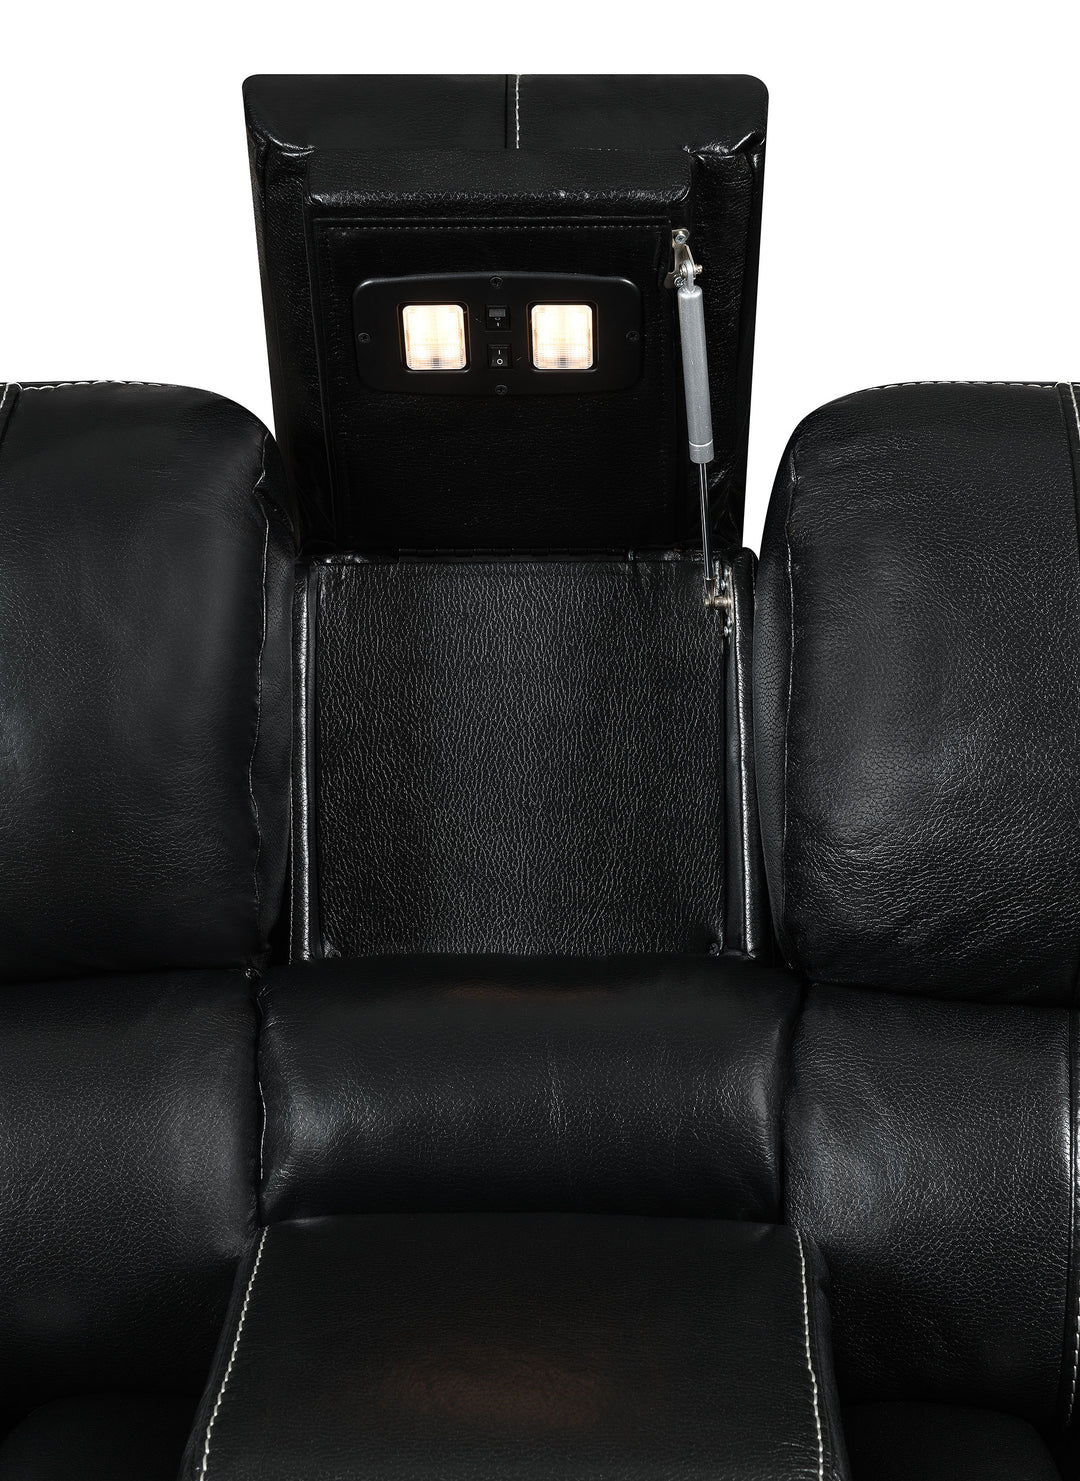 Willemse Motion Loveseat with Console Black